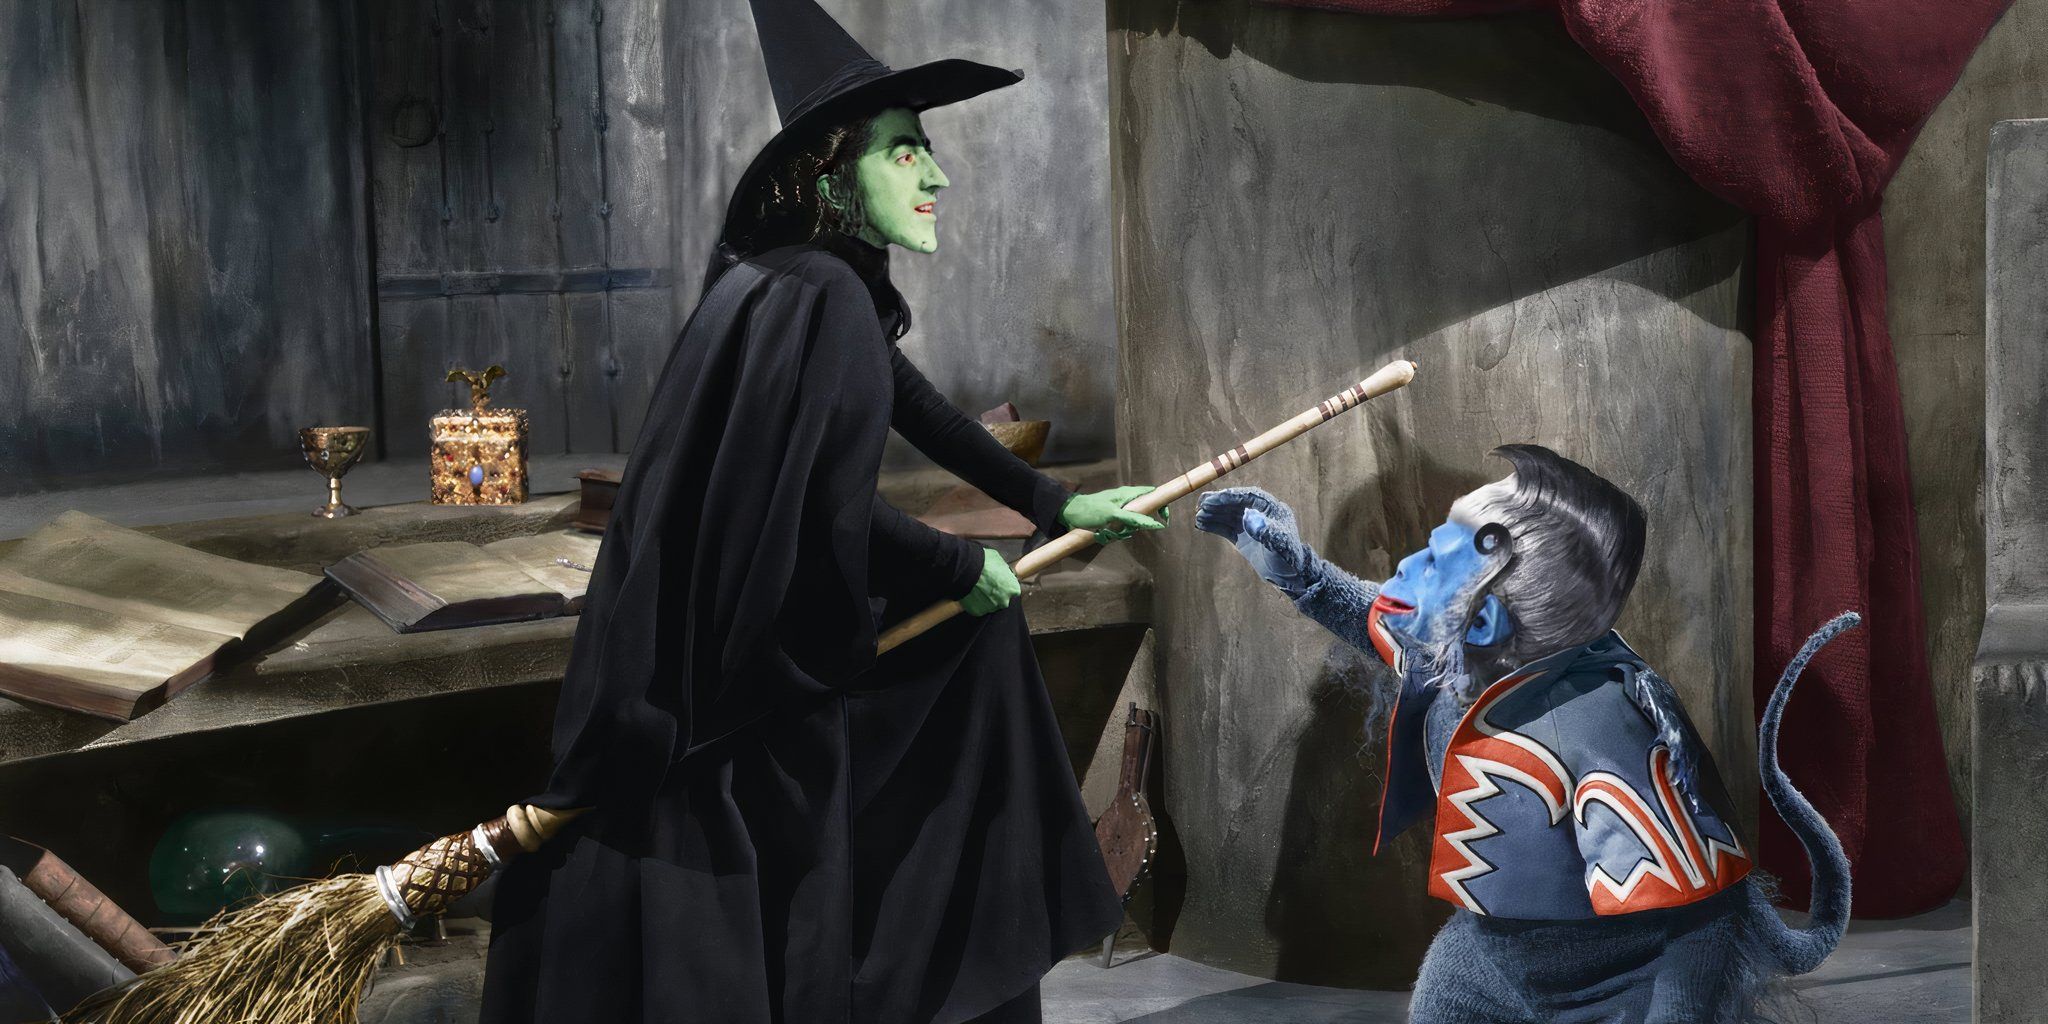 The Wicked Witch on her broom and a flying monkey in 'The Wizard of Oz'